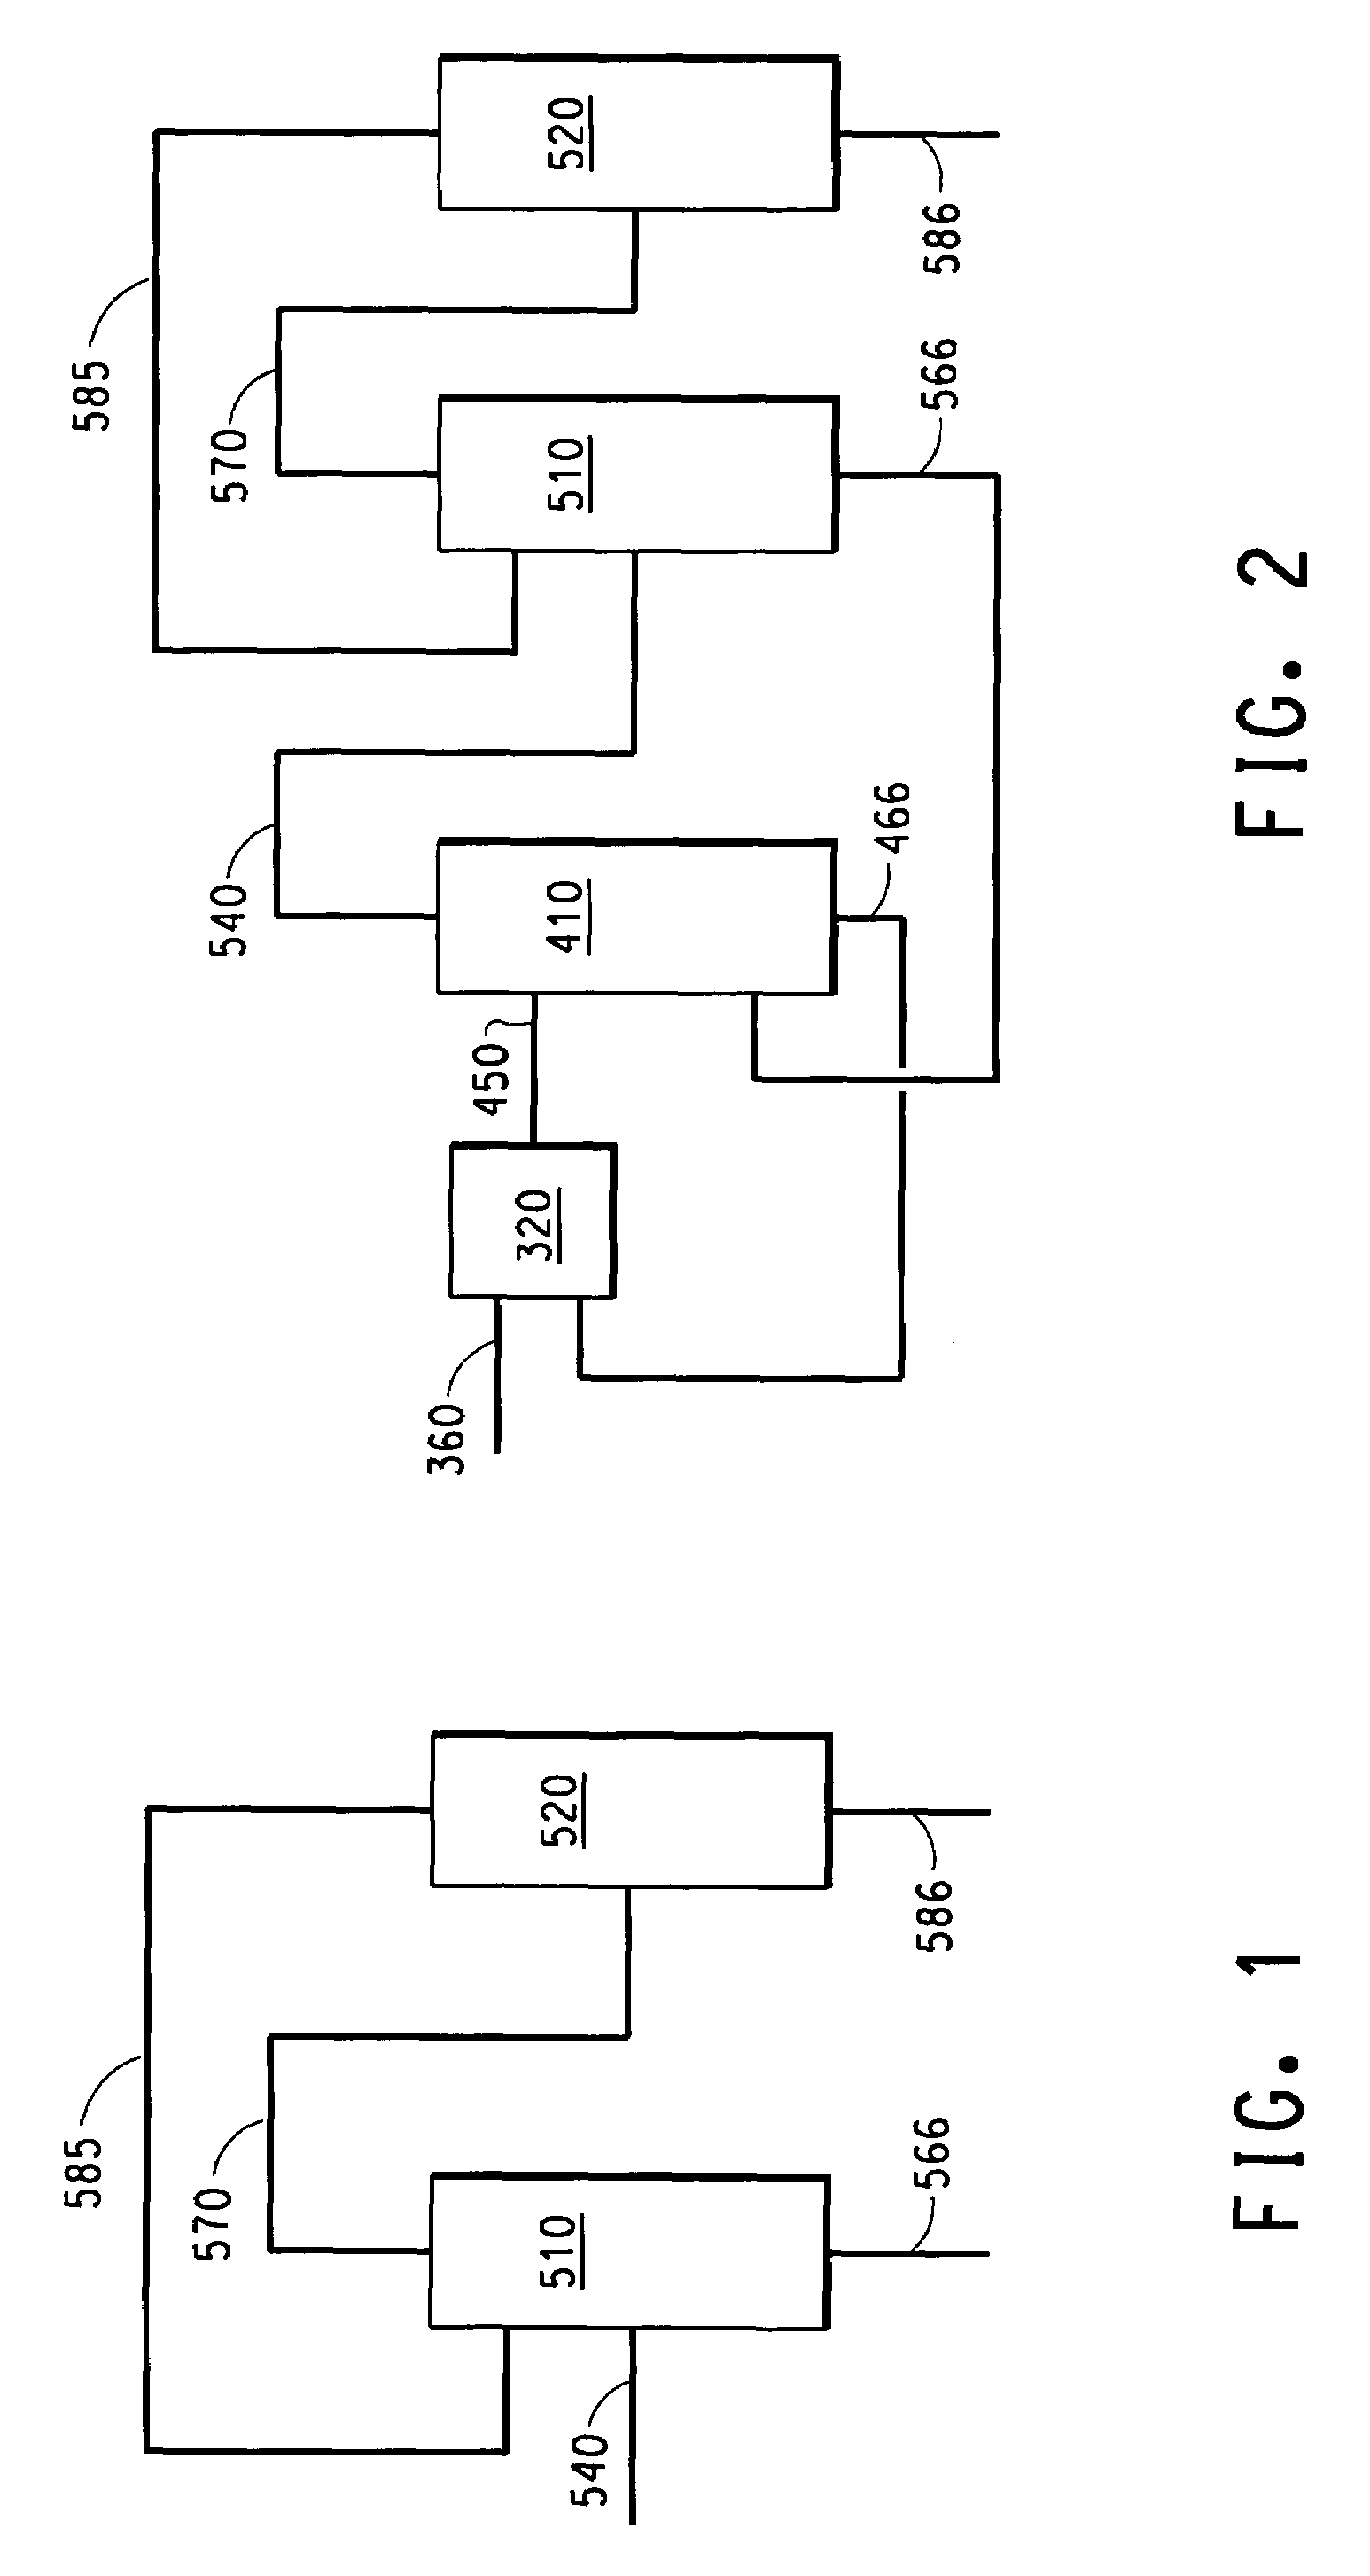 Azeotrope compositions comprising 2,3,3,3-tetrafluoropropene and hydrogen fluoride and uses thereof